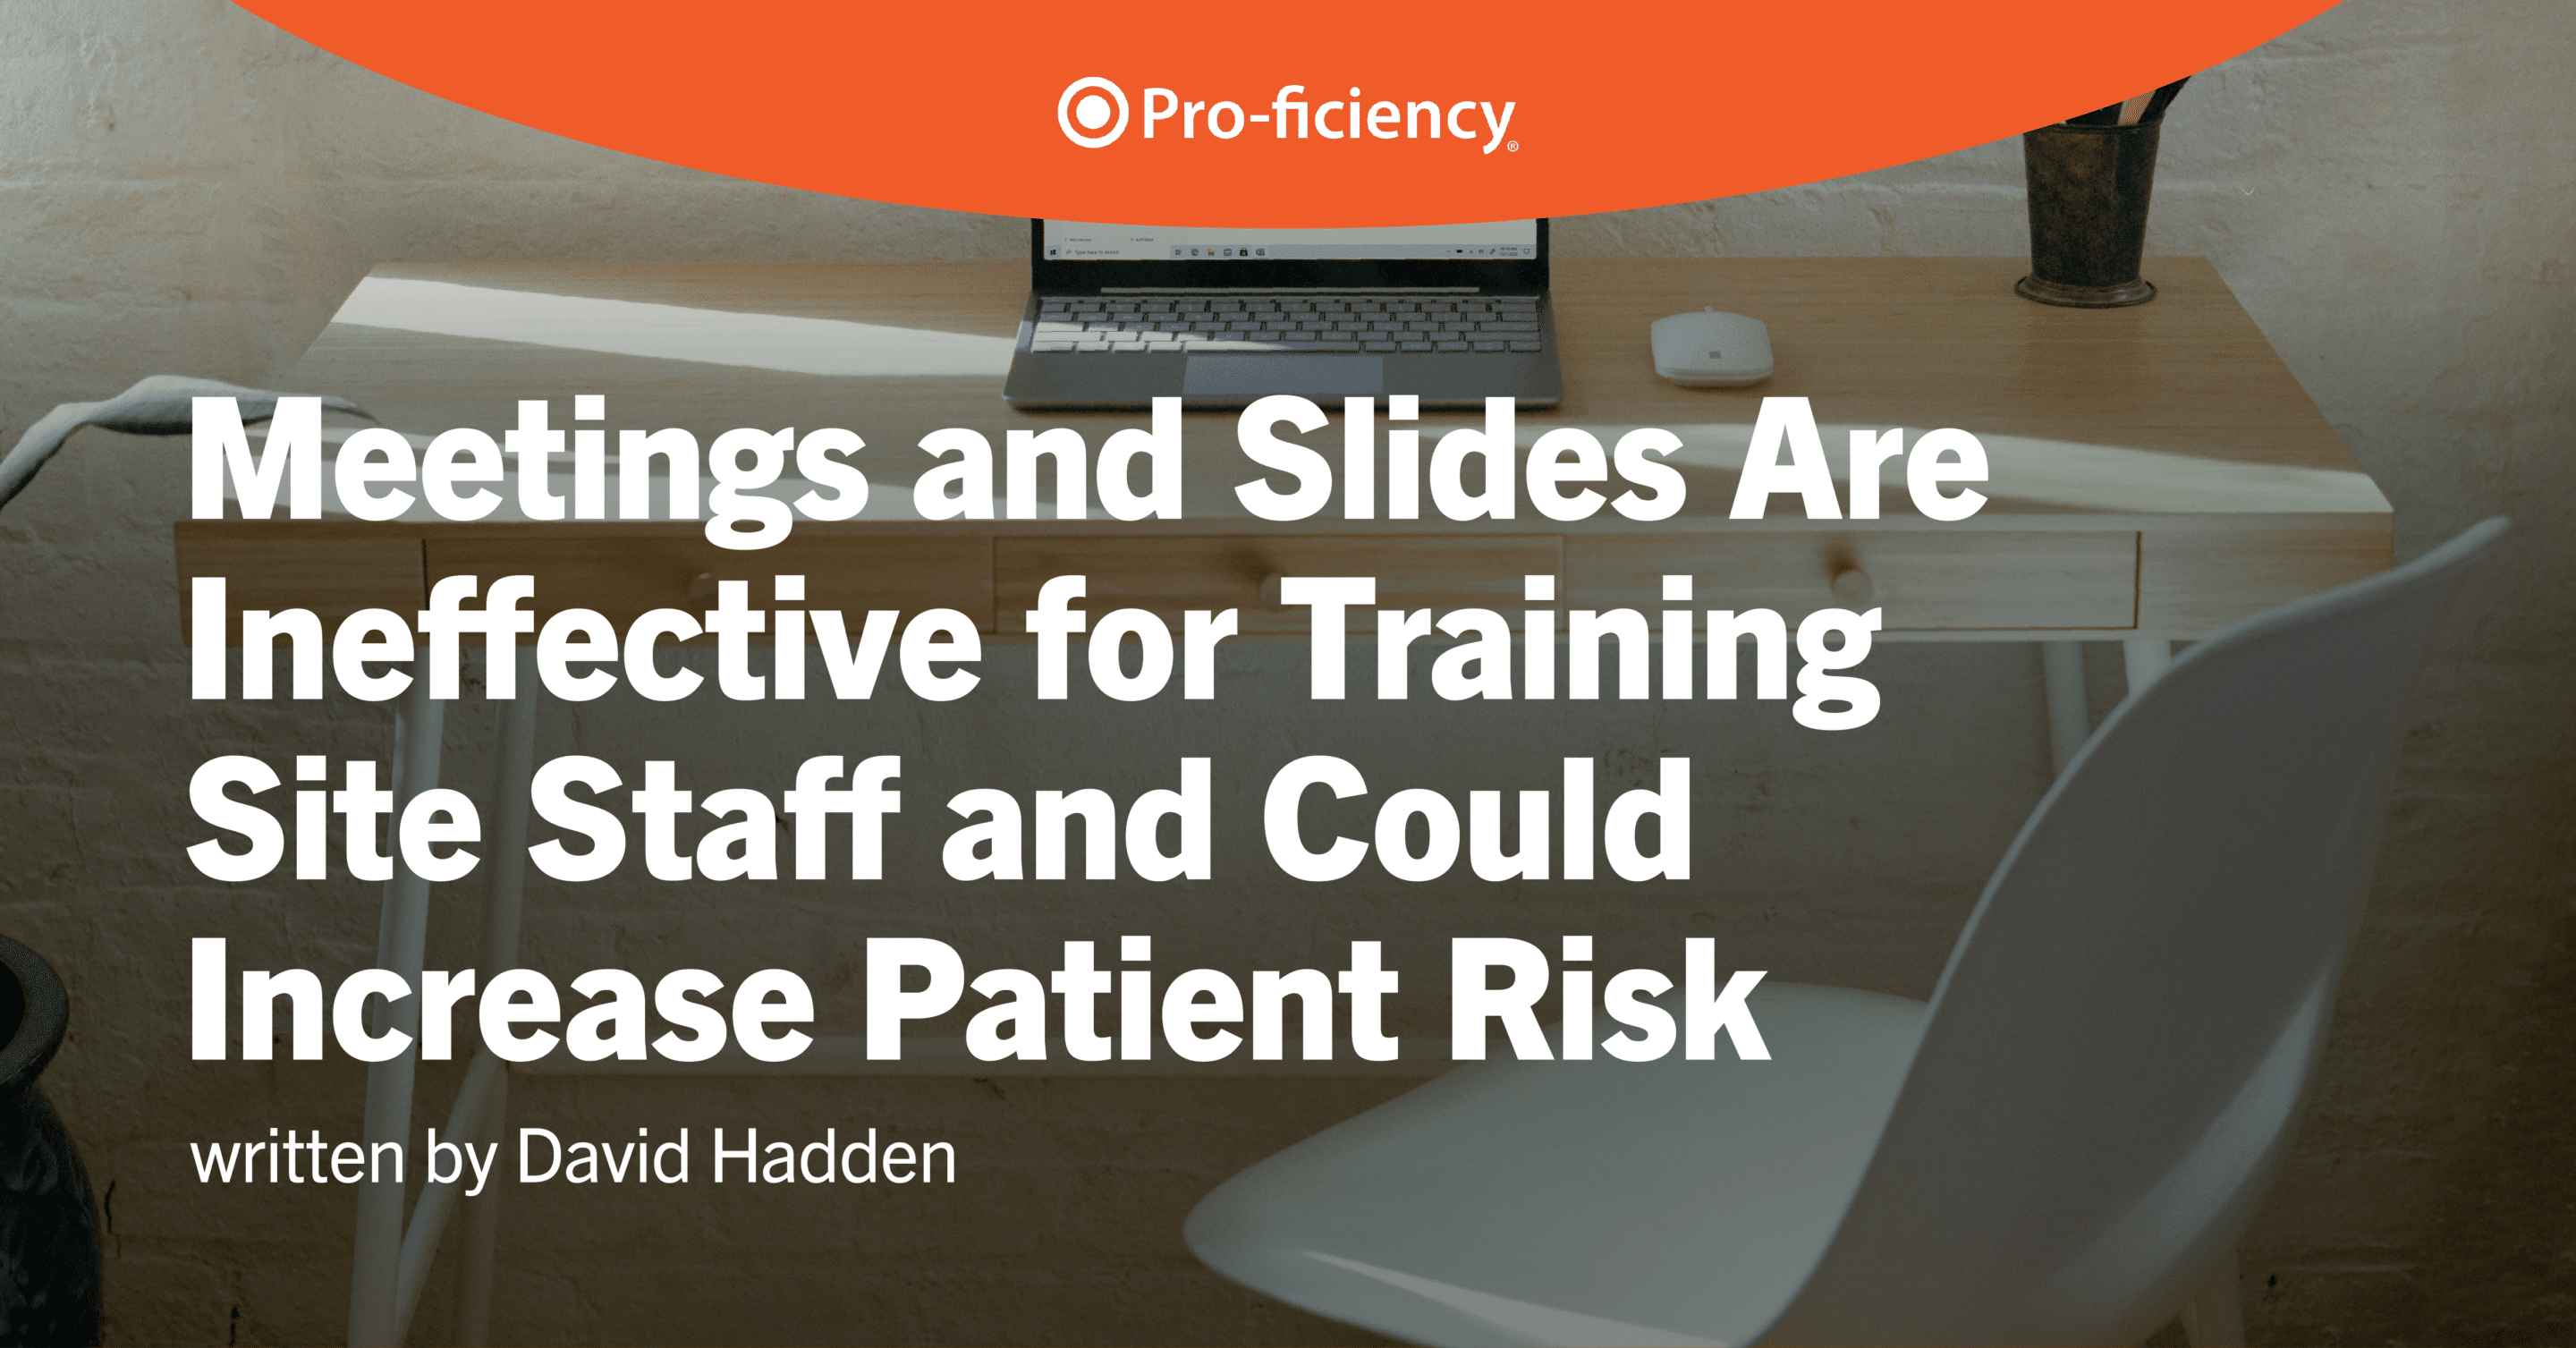 Meetings and Slides Are Ineffective for Training Site Staff and Could Increase Patient Risk